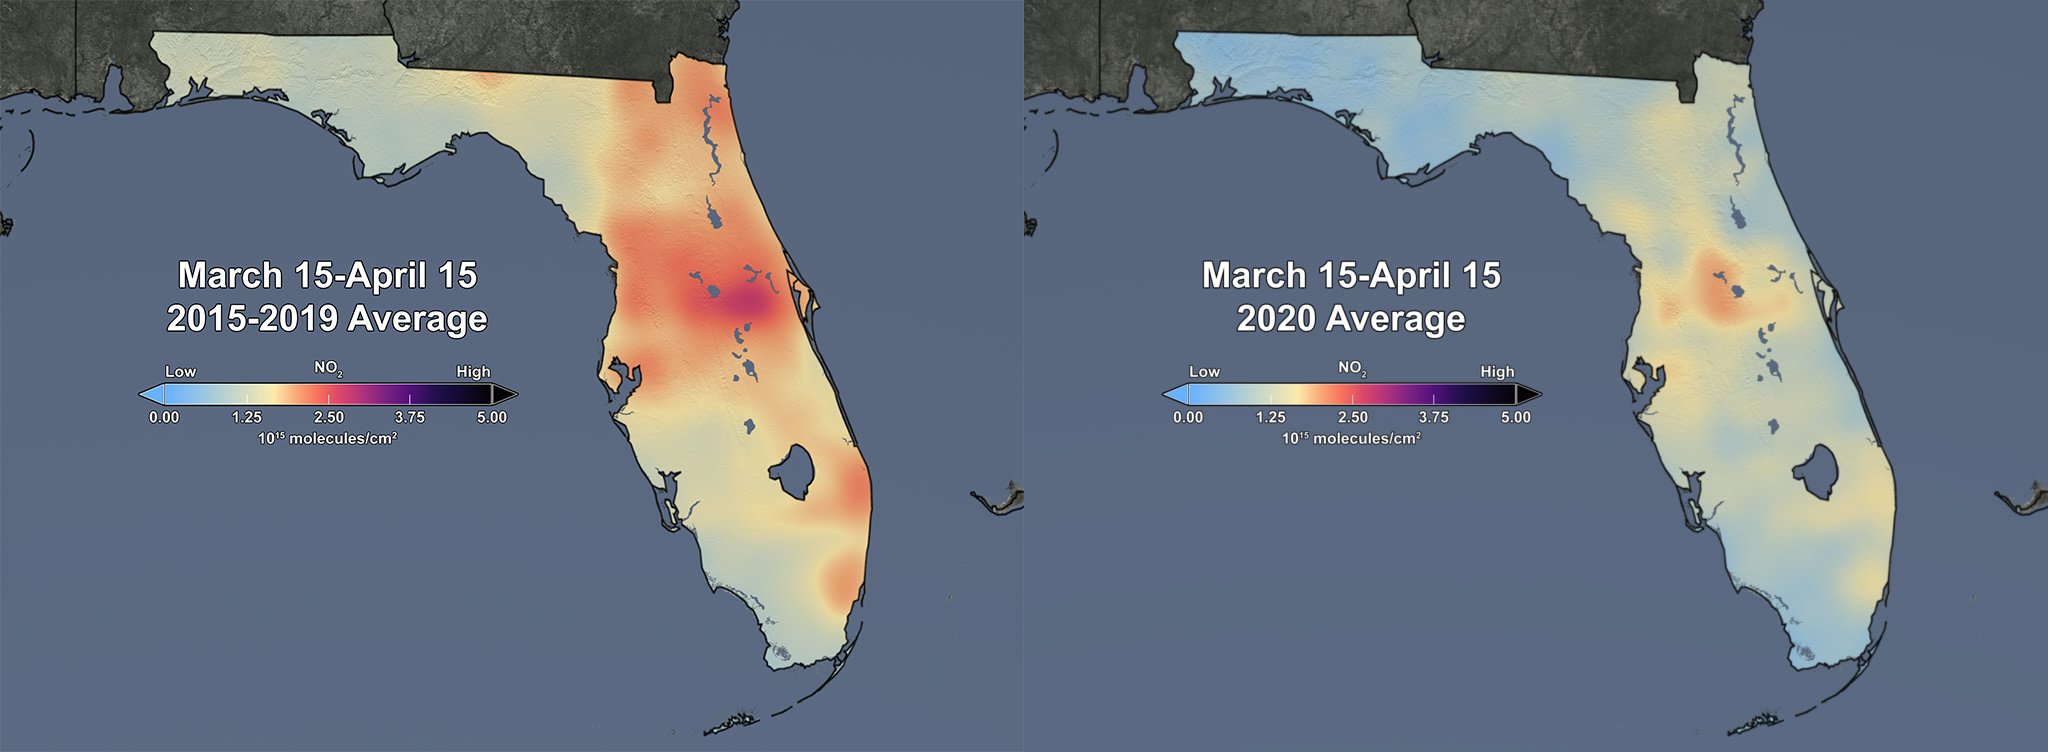 Left: The mean levels of NO2 over Florida from 2015 to 2019 during the period of March 15 to April 15. Right: NO2 levels over Florida from March 15 to April 15, 2020. (NASA)